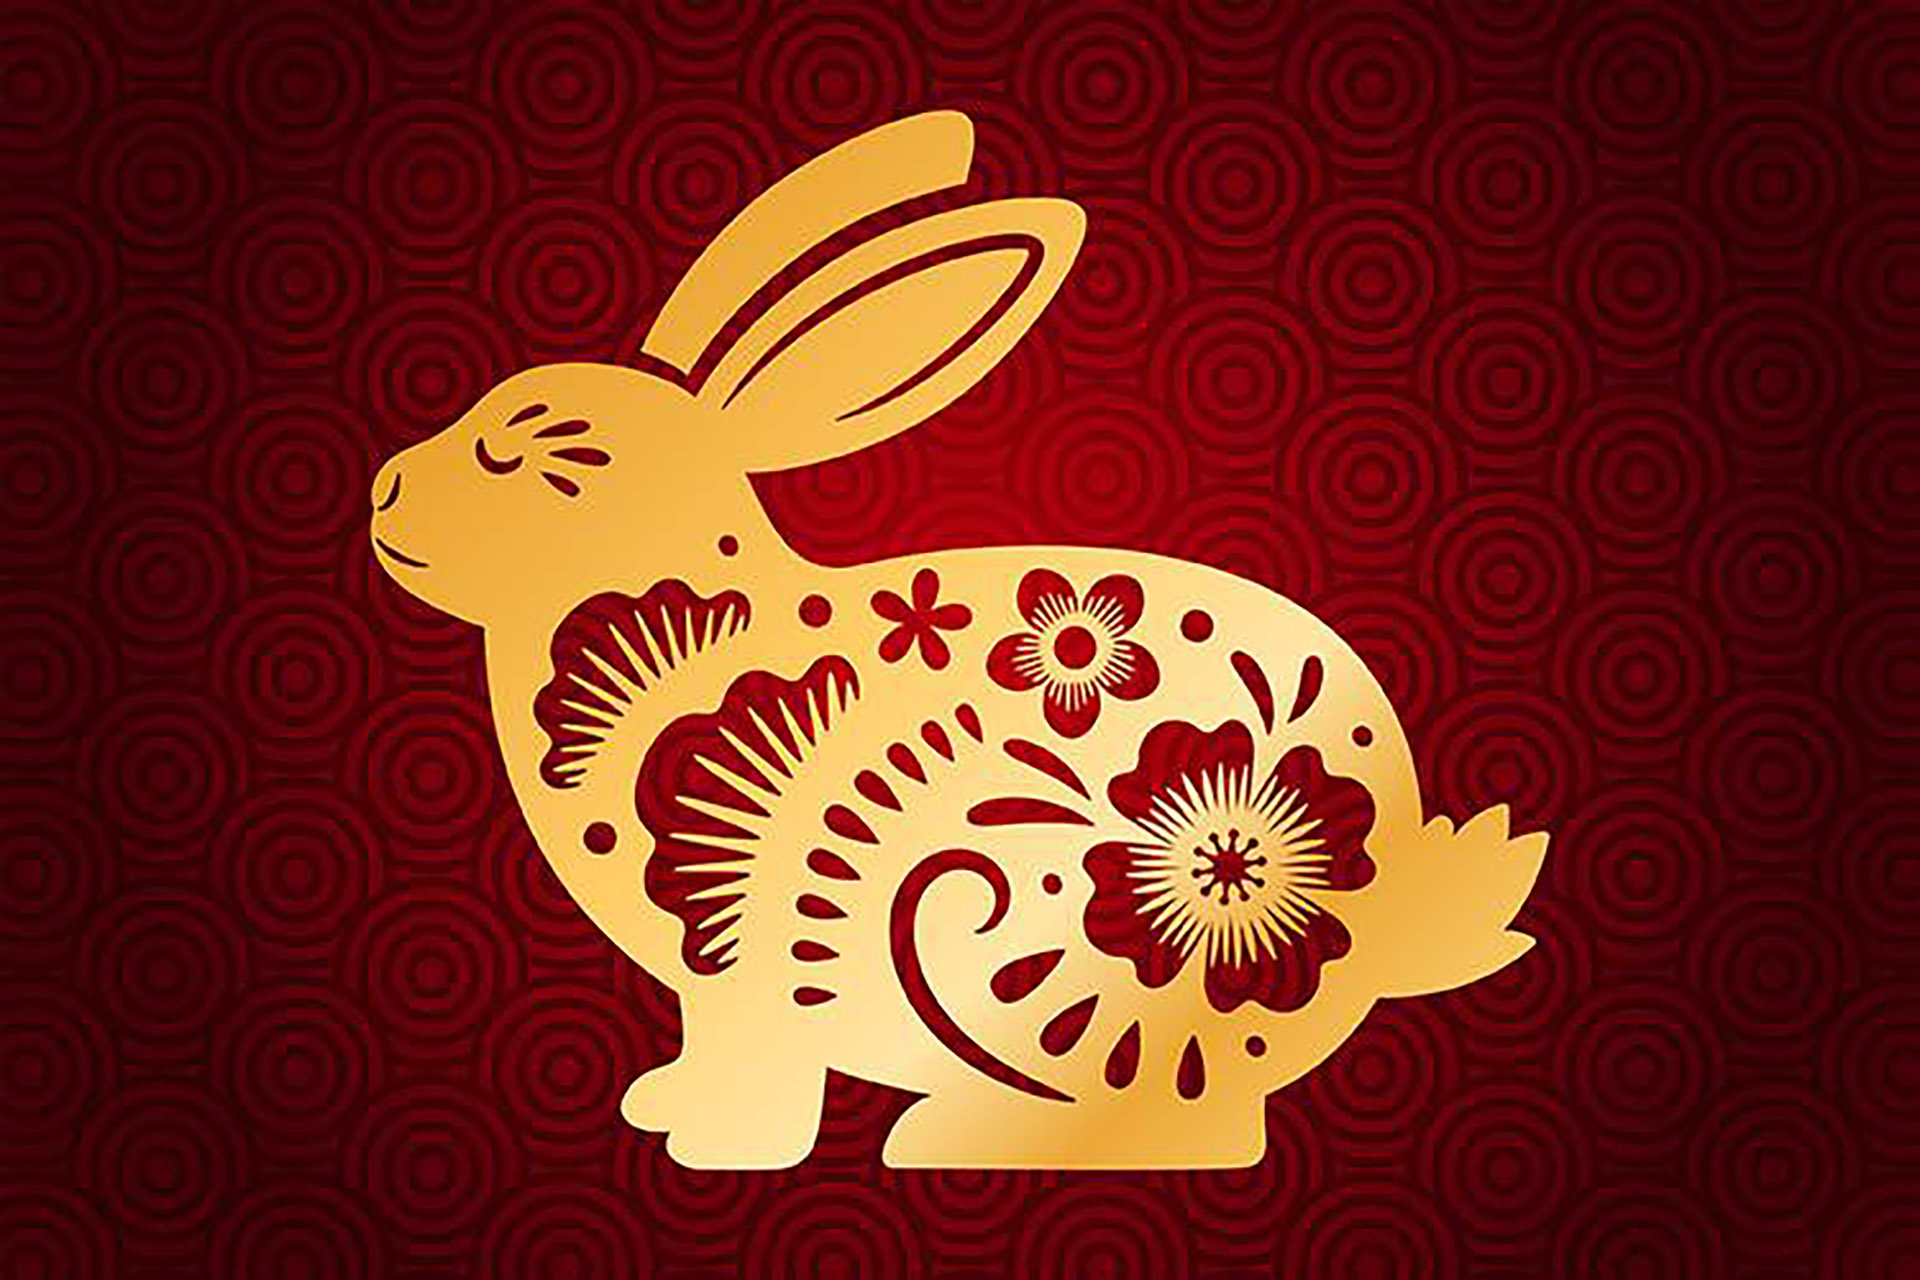 HCHSAA Marks Lunar New Year, the Year of the Rabbit!